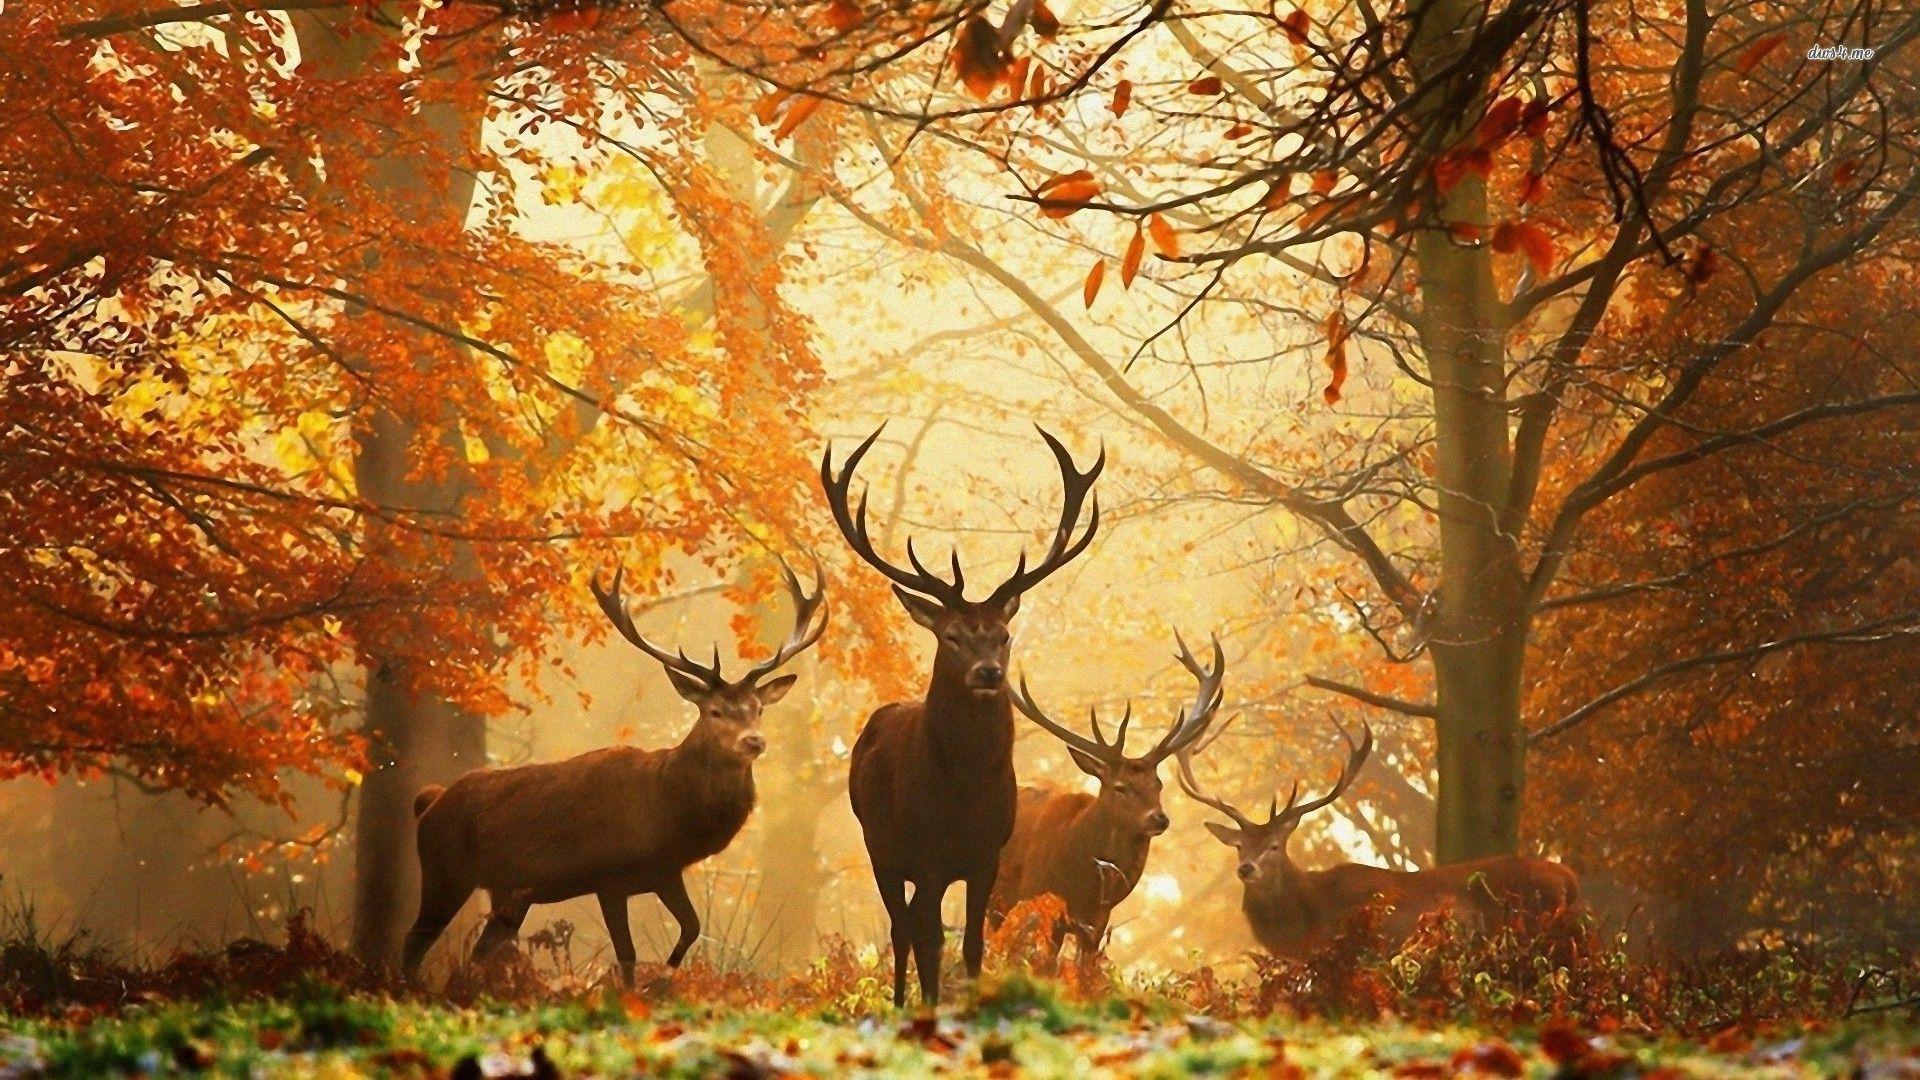 Deers in the autumn forest. Nature animals, Animal